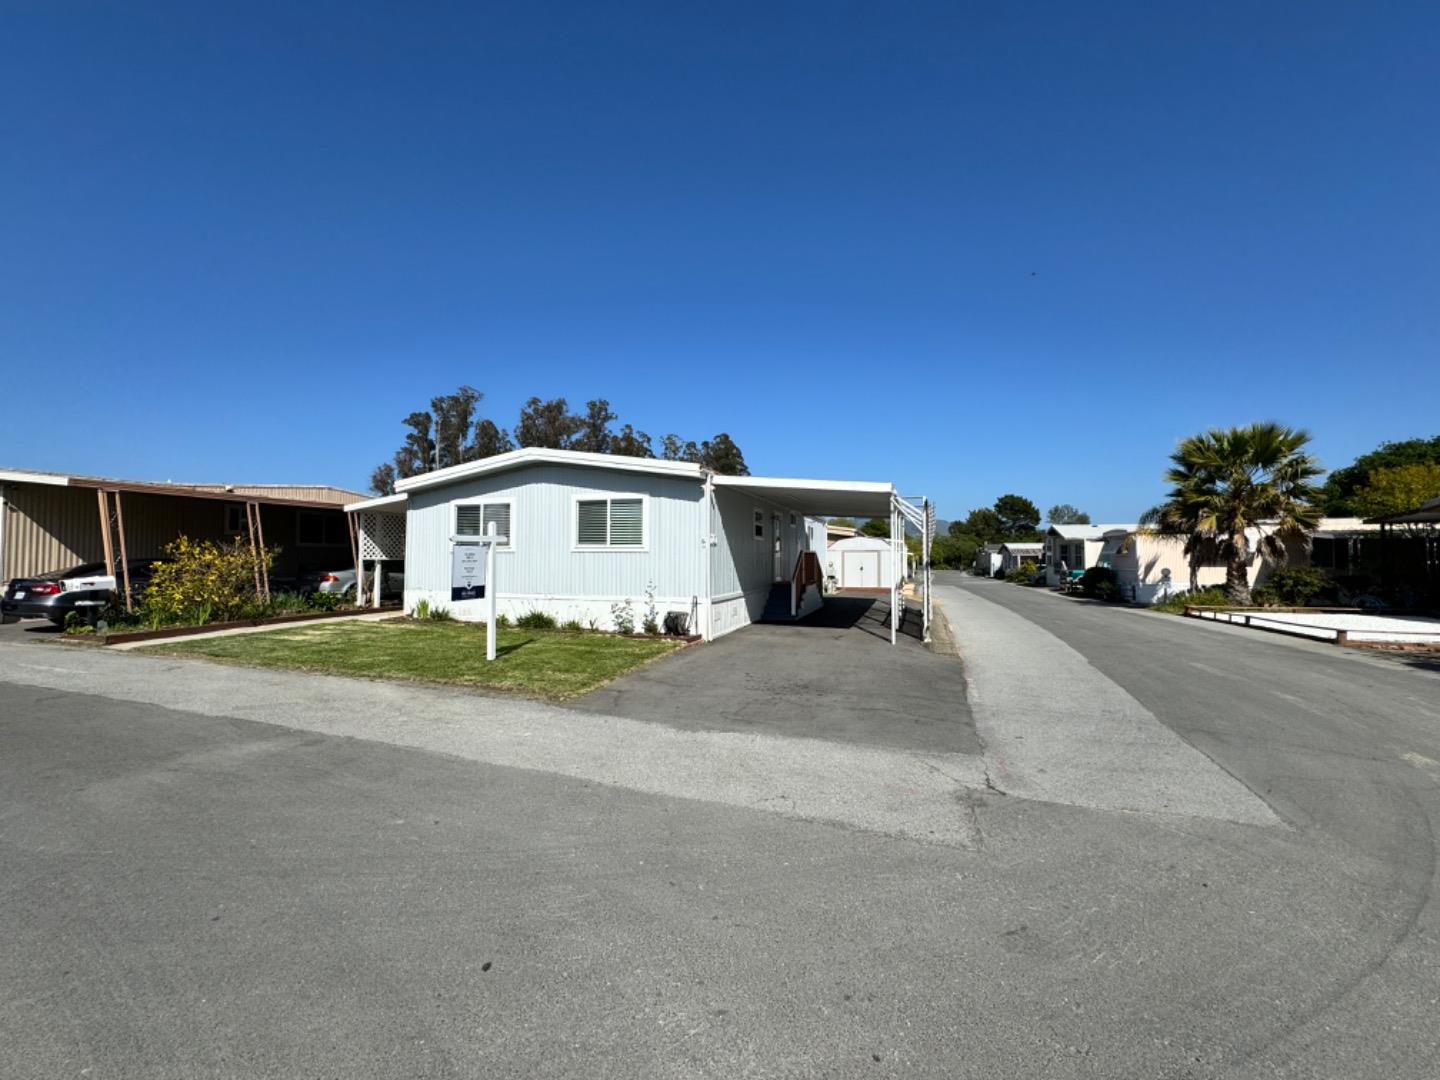 Photo of 789 Green Valley Rd #110 in Watsonville, CA